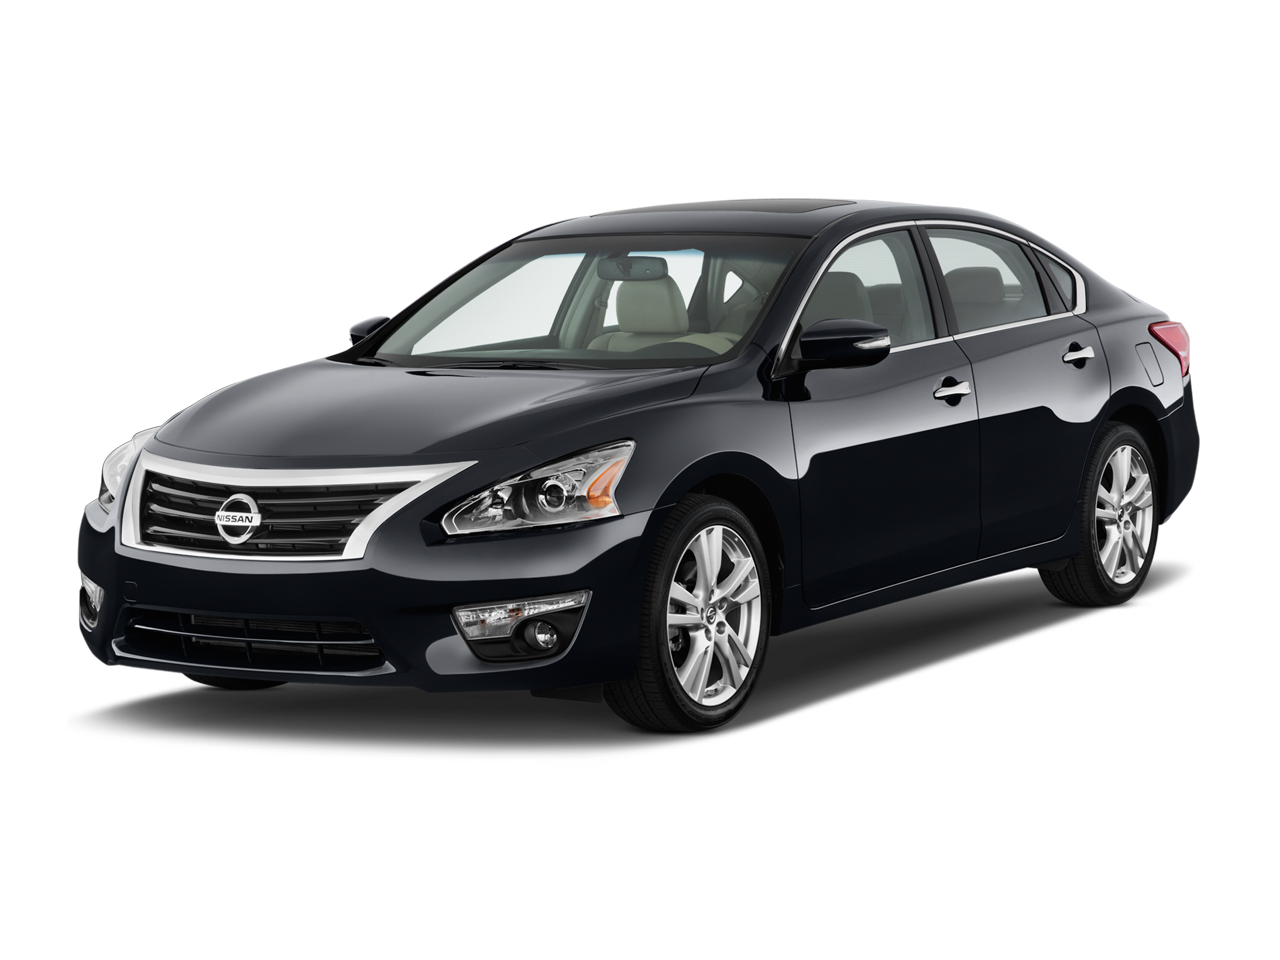 New Car Review 2013 Nissan Altima 2 5 SL